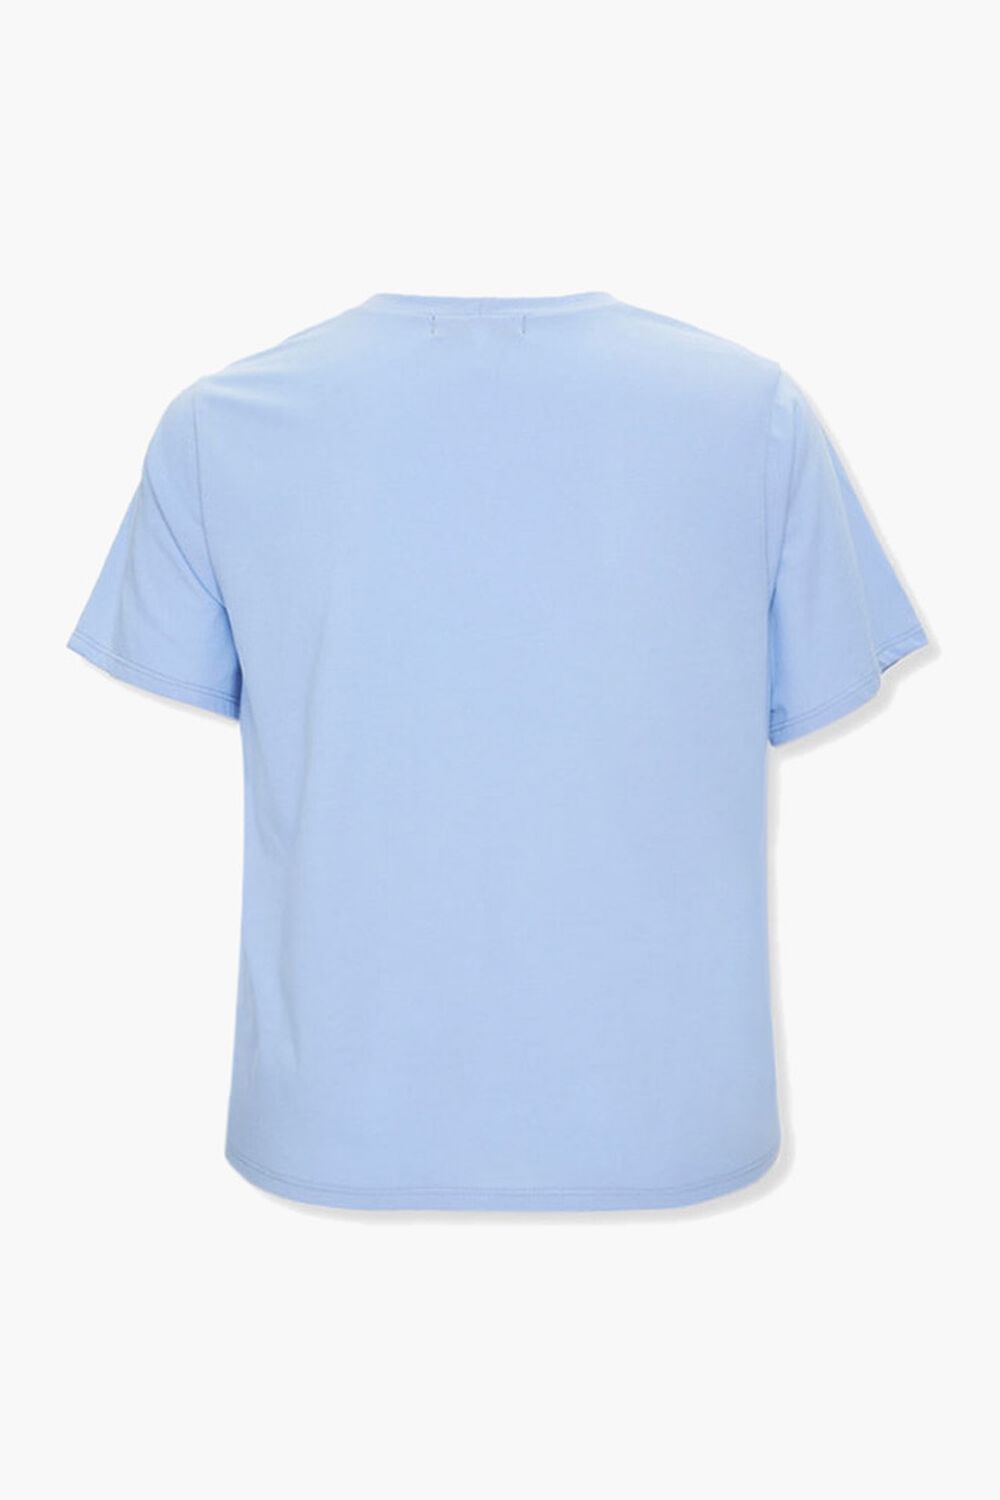 LIGHT BLUE Plus Size Butterfly Graphic Tee, image 2